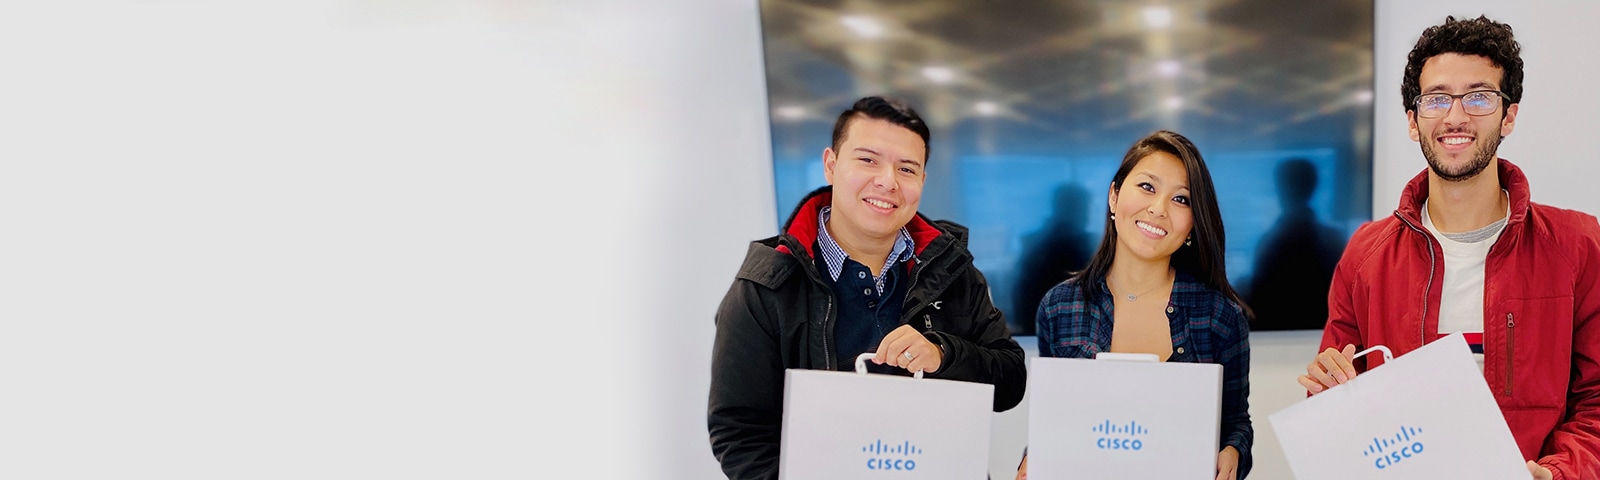 Three people stand together and smile while holding Cisco briefcases.